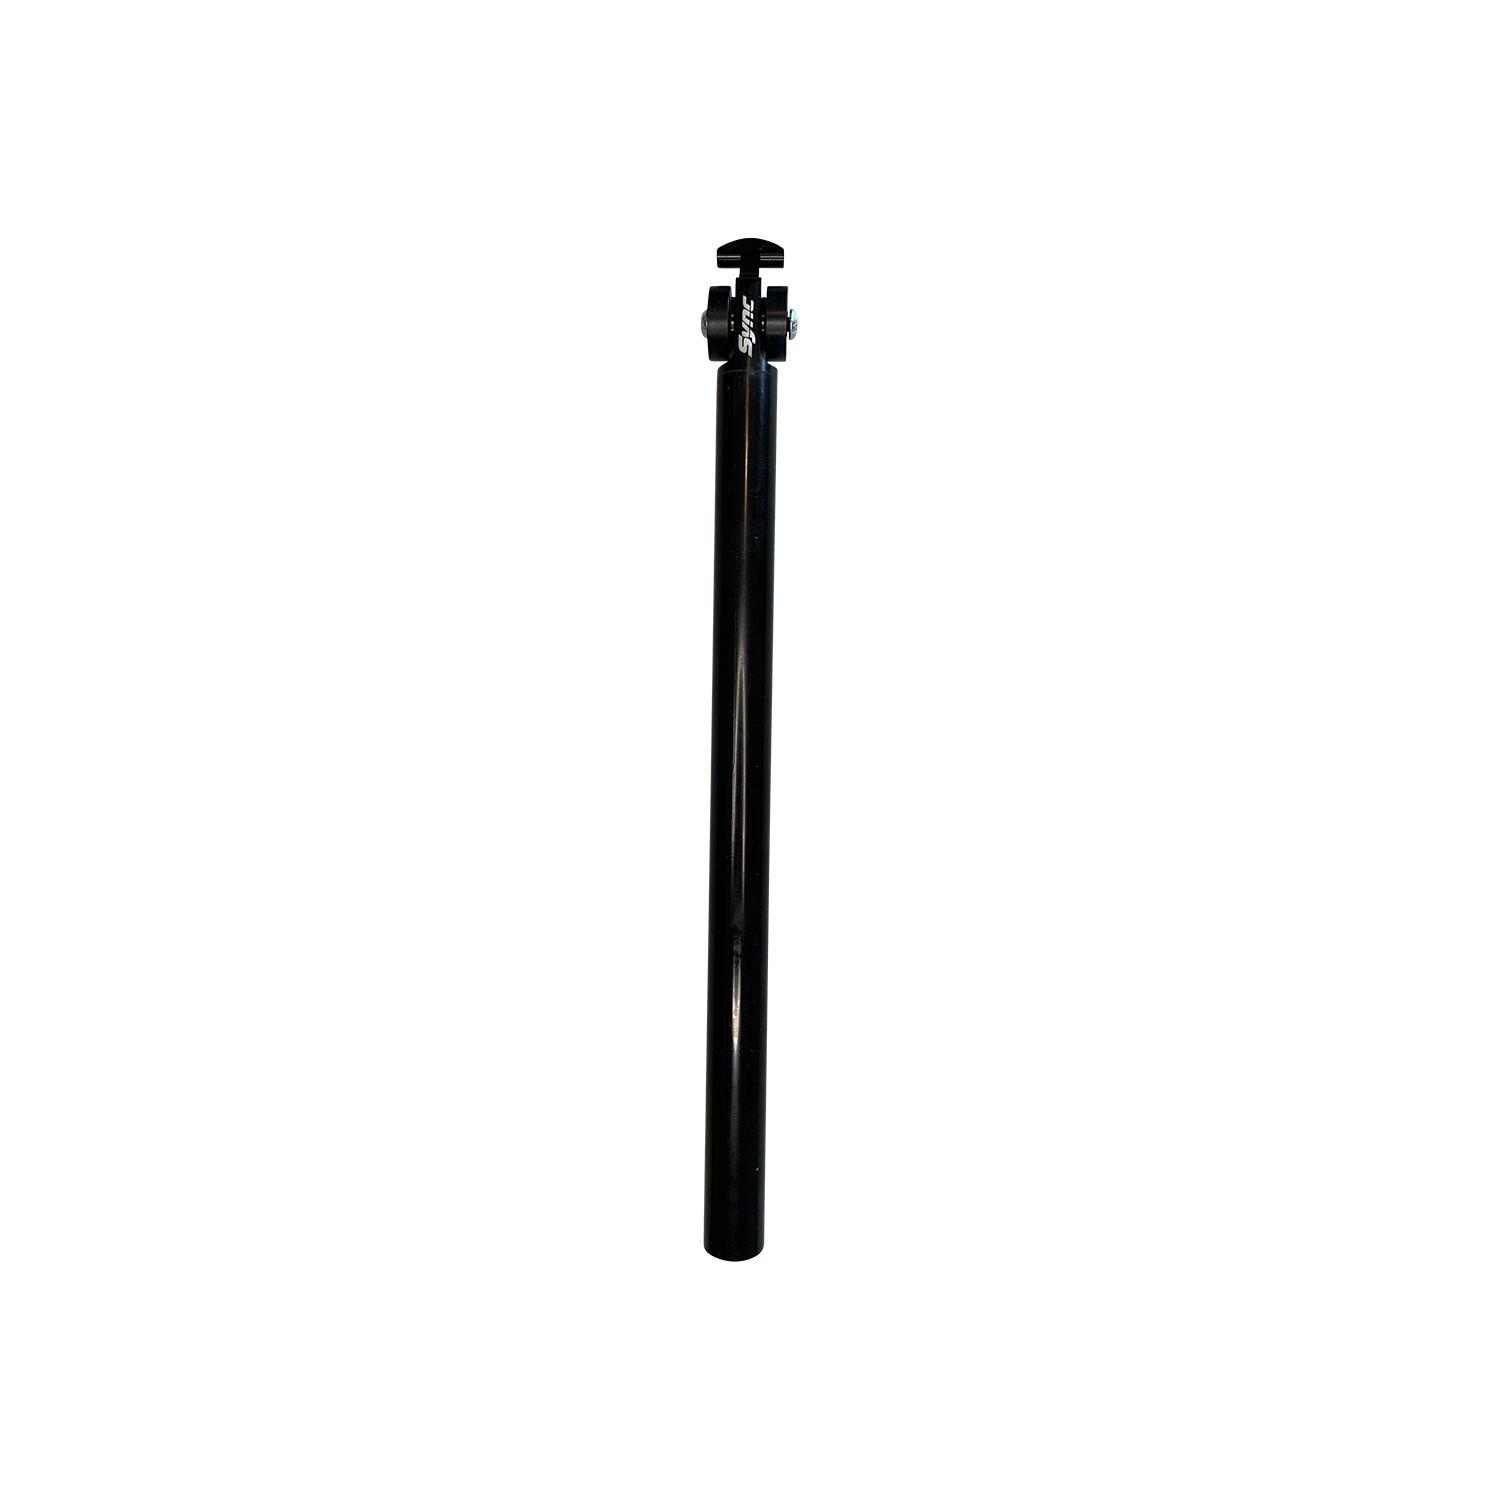 TOP WING ROLLER POST ASSEMBLY - ADJUSTABLE